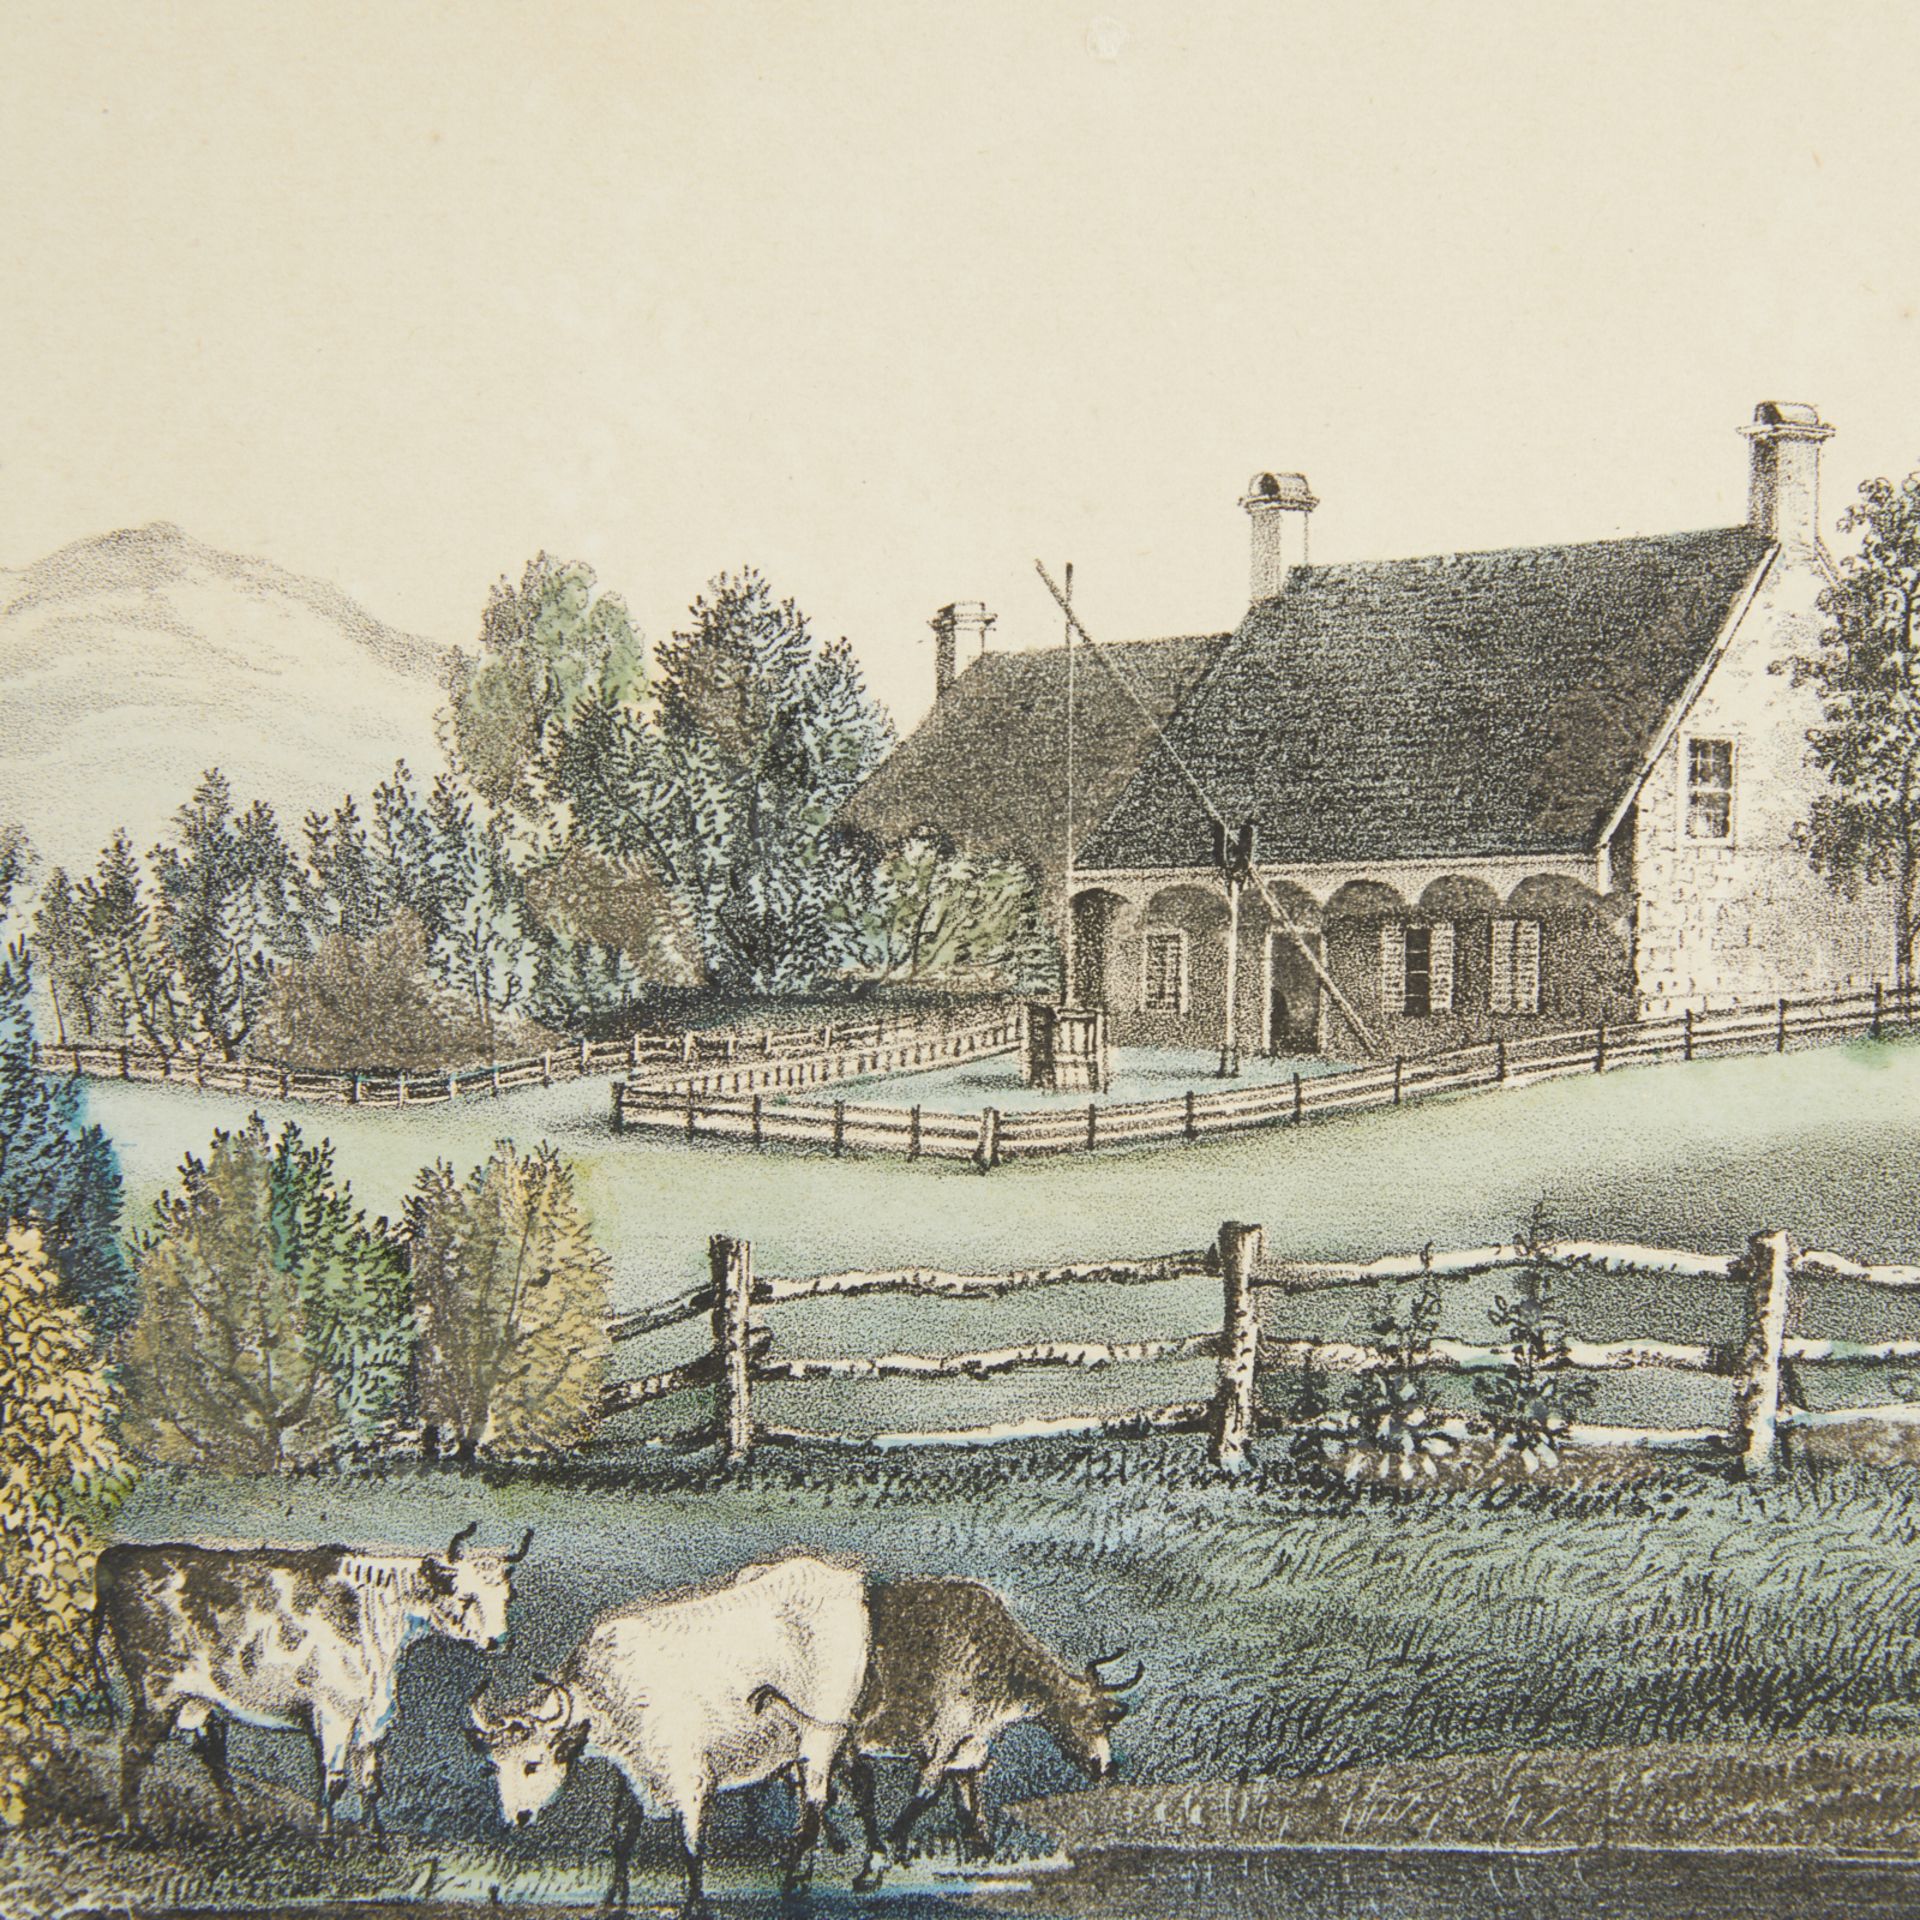 Currier & Ives "American Farm Scene: Olden Time" - Image 6 of 7